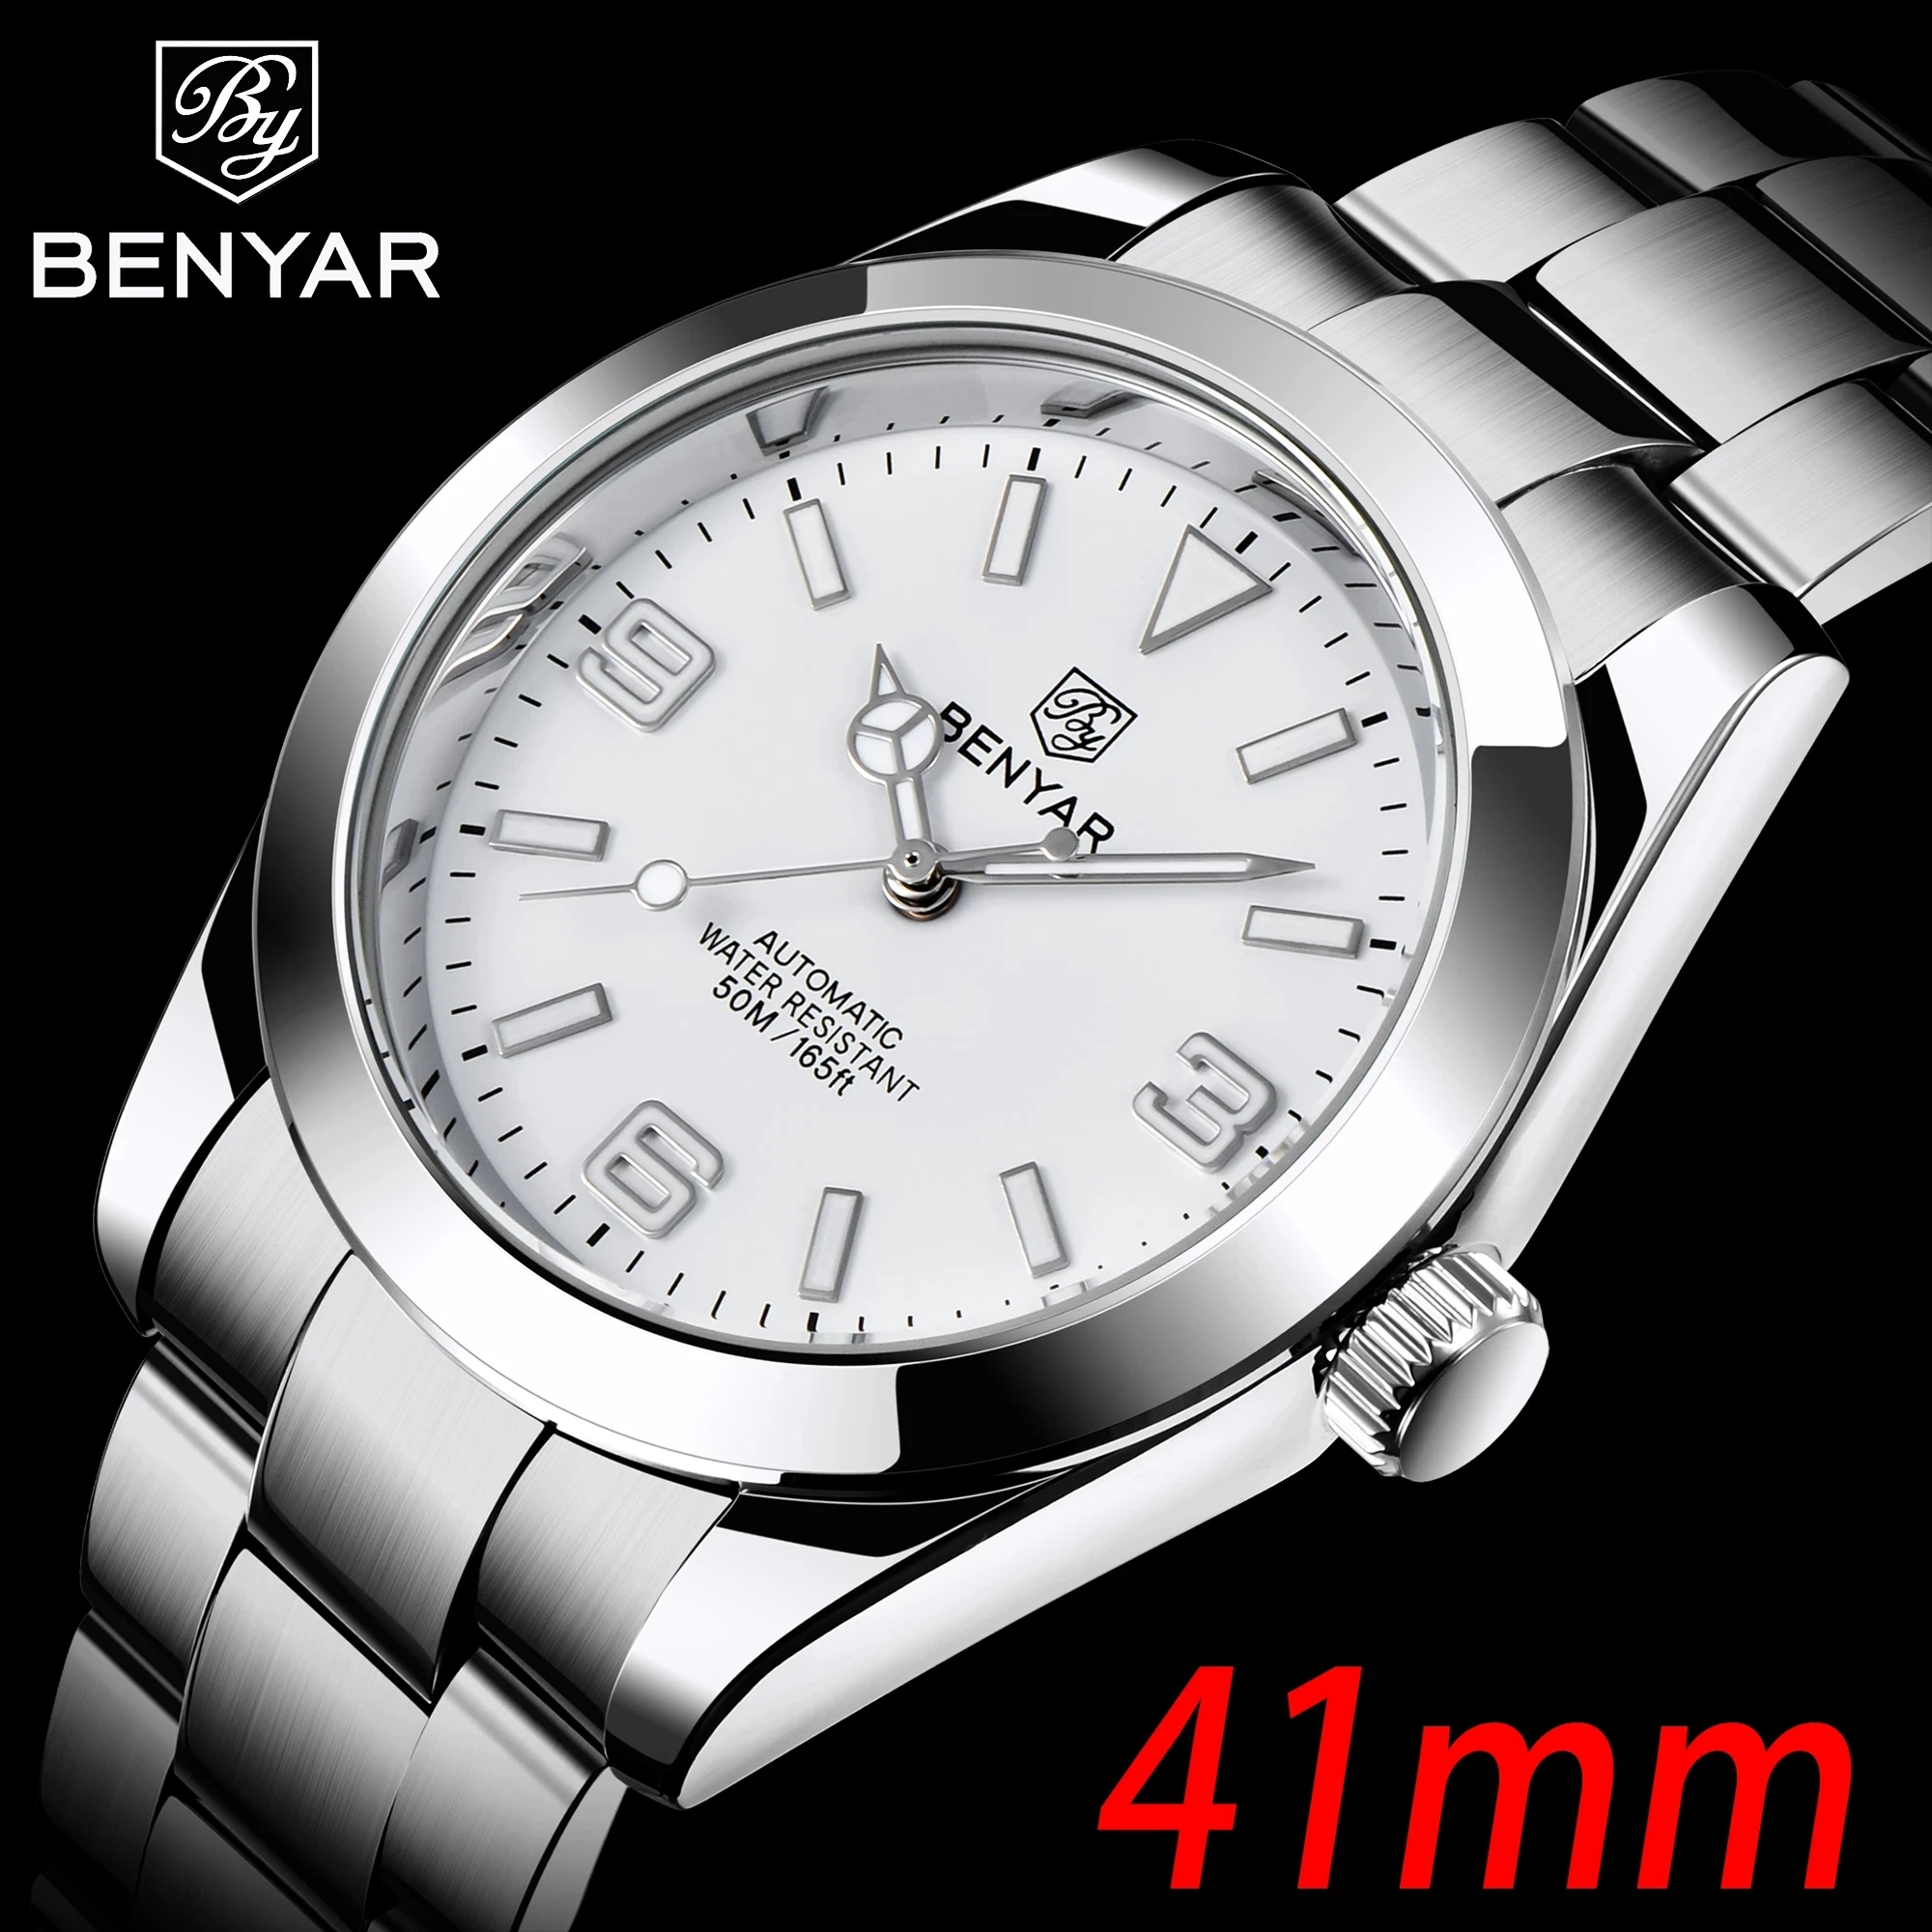 BENYAR Automatic Mechanical Watches Men's Top Luxury Brand 41MM Dial Business Stainless Steel Strap Waterproof Watches Luminous